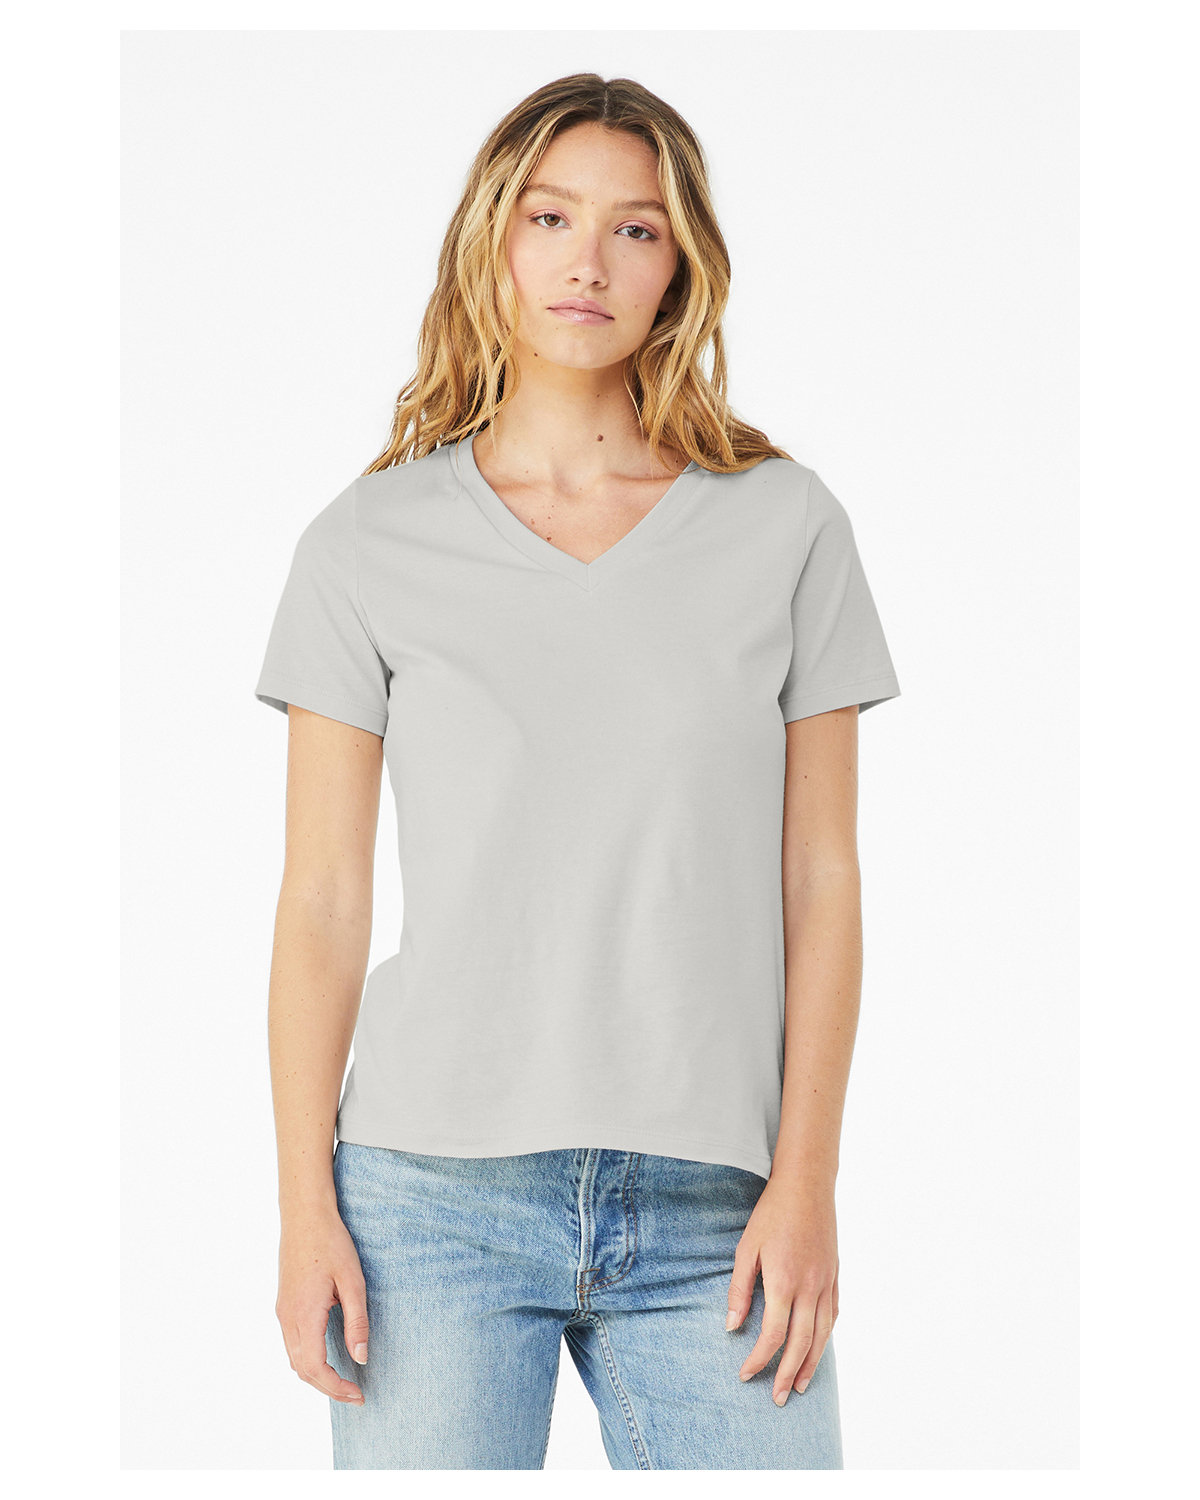 Bella + Canvas Ladies' Relaxed Jersey V-Neck T-Shirt SILVER 